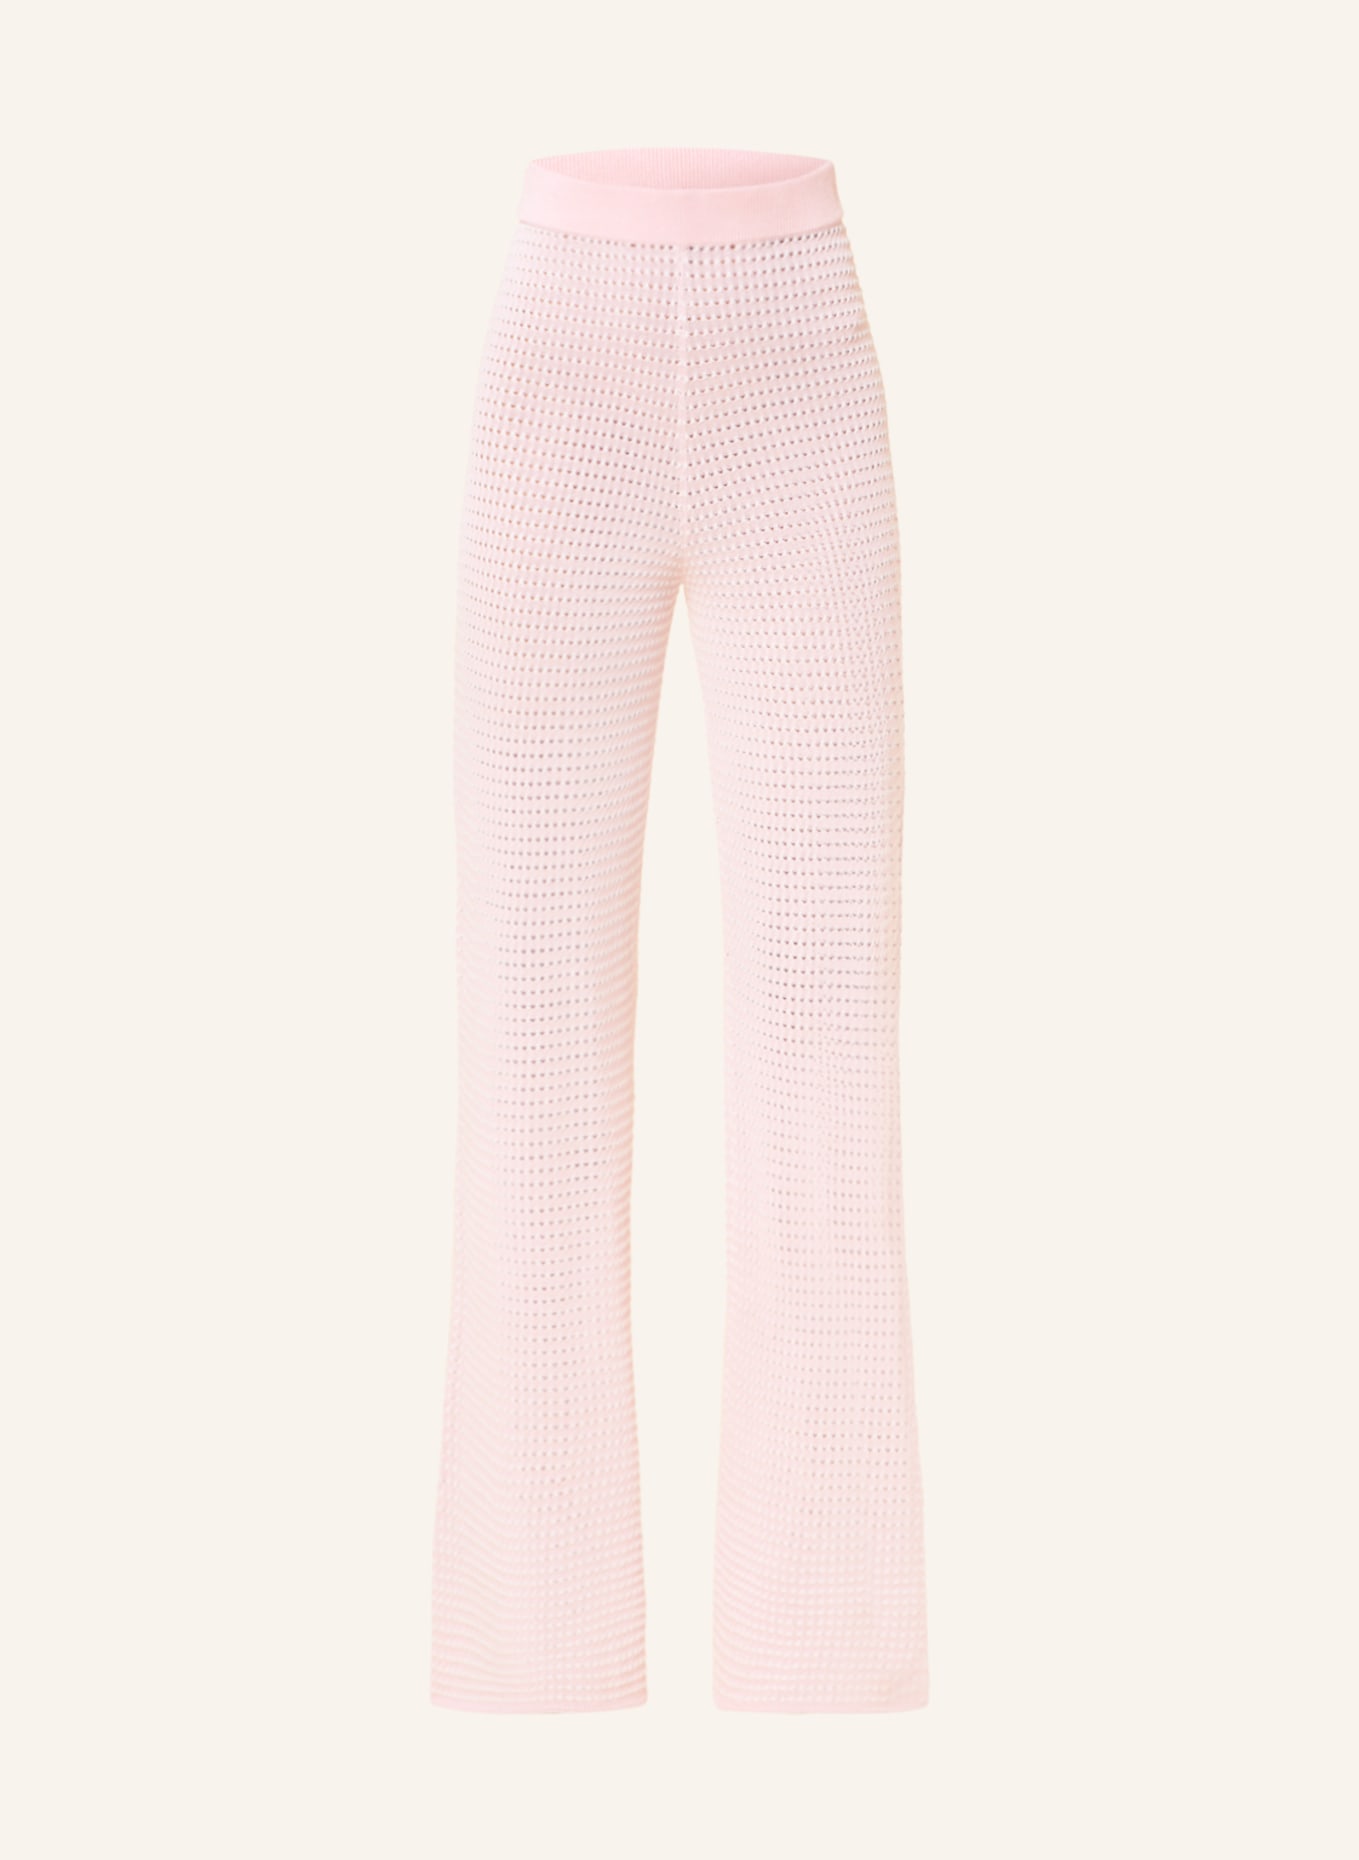 REMAIN Knit trousers, Color: LIGHT PINK/ WHITE (Image 1)